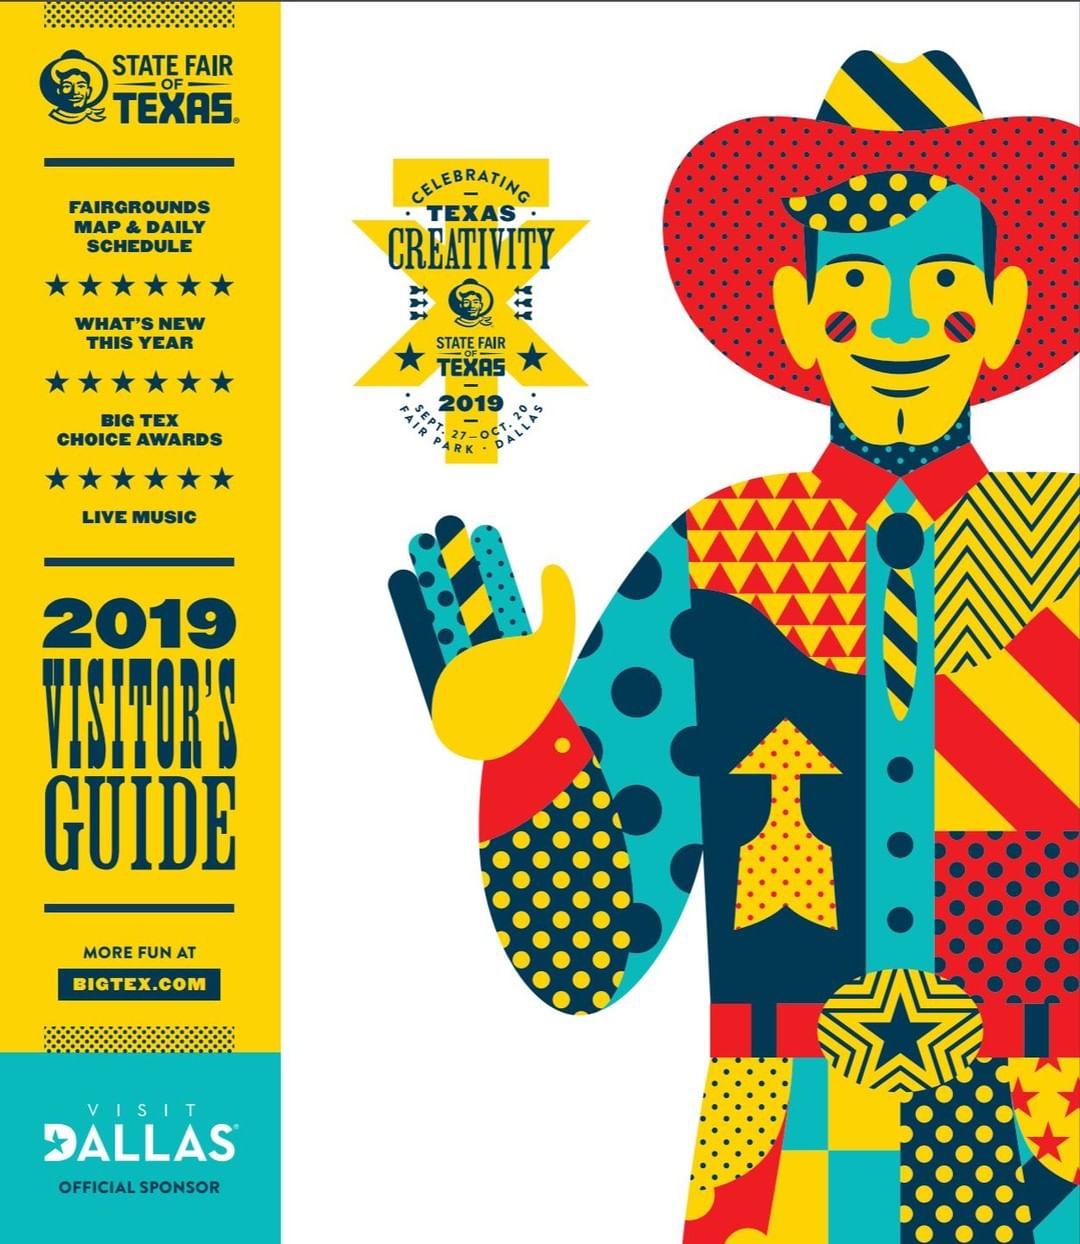 Have you seen the new Visitor’s Guide!? New layout, BIGGER map, and MORE #StateFairofTX events/shows information. Sponsored by @visit_dallas, this year’s VG is available online, at the gates, & at hospitality centers. 🤠📍 https://bit.ly/2LpBpDN